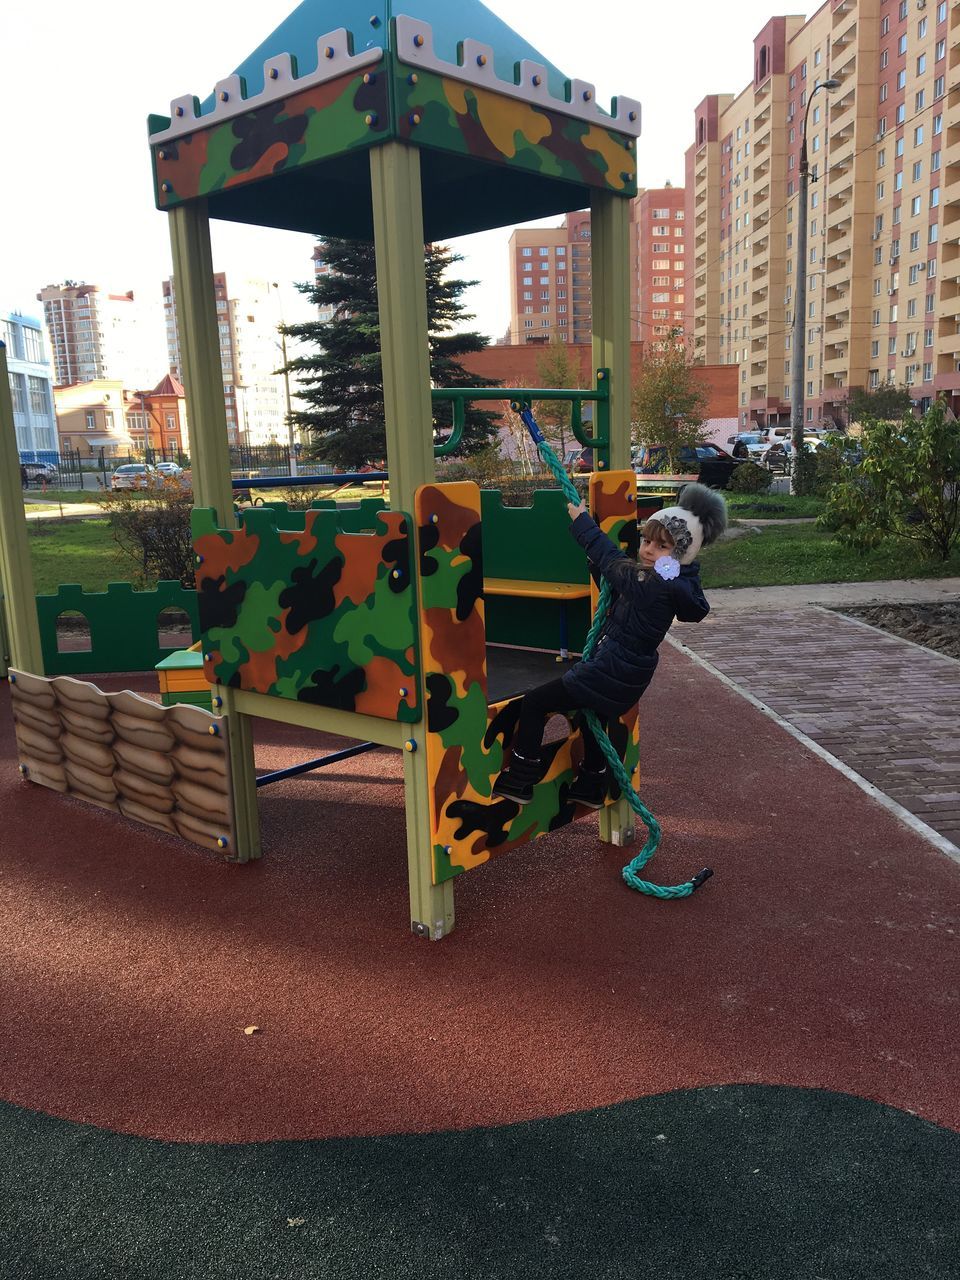 city, architecture, no people, slide - play equipment, outdoors, sky, day